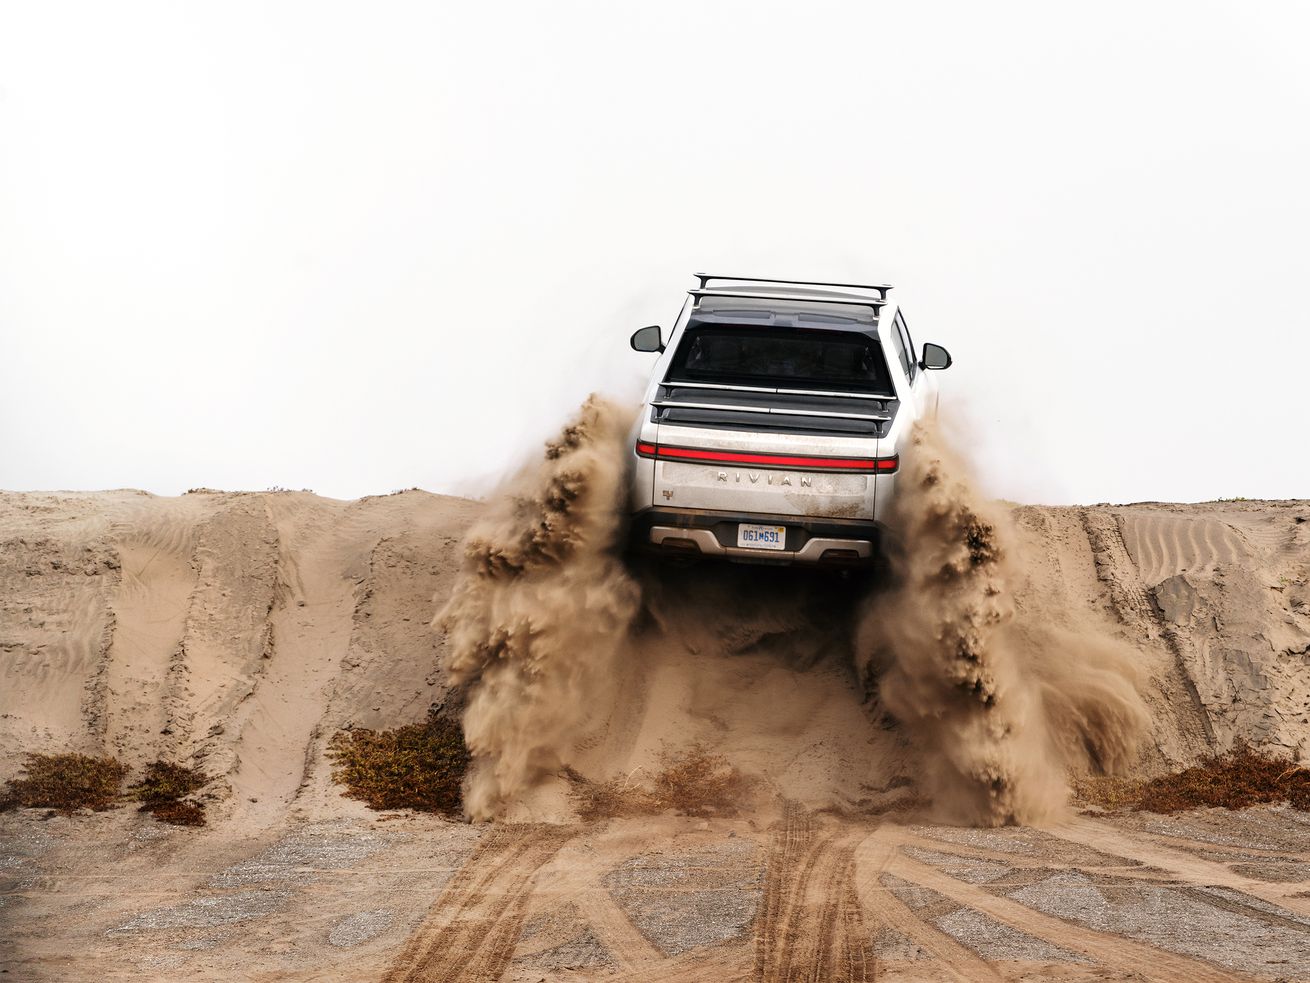 One of Rivian’s car models is seen driving away from the camera and over a pile of dirt.